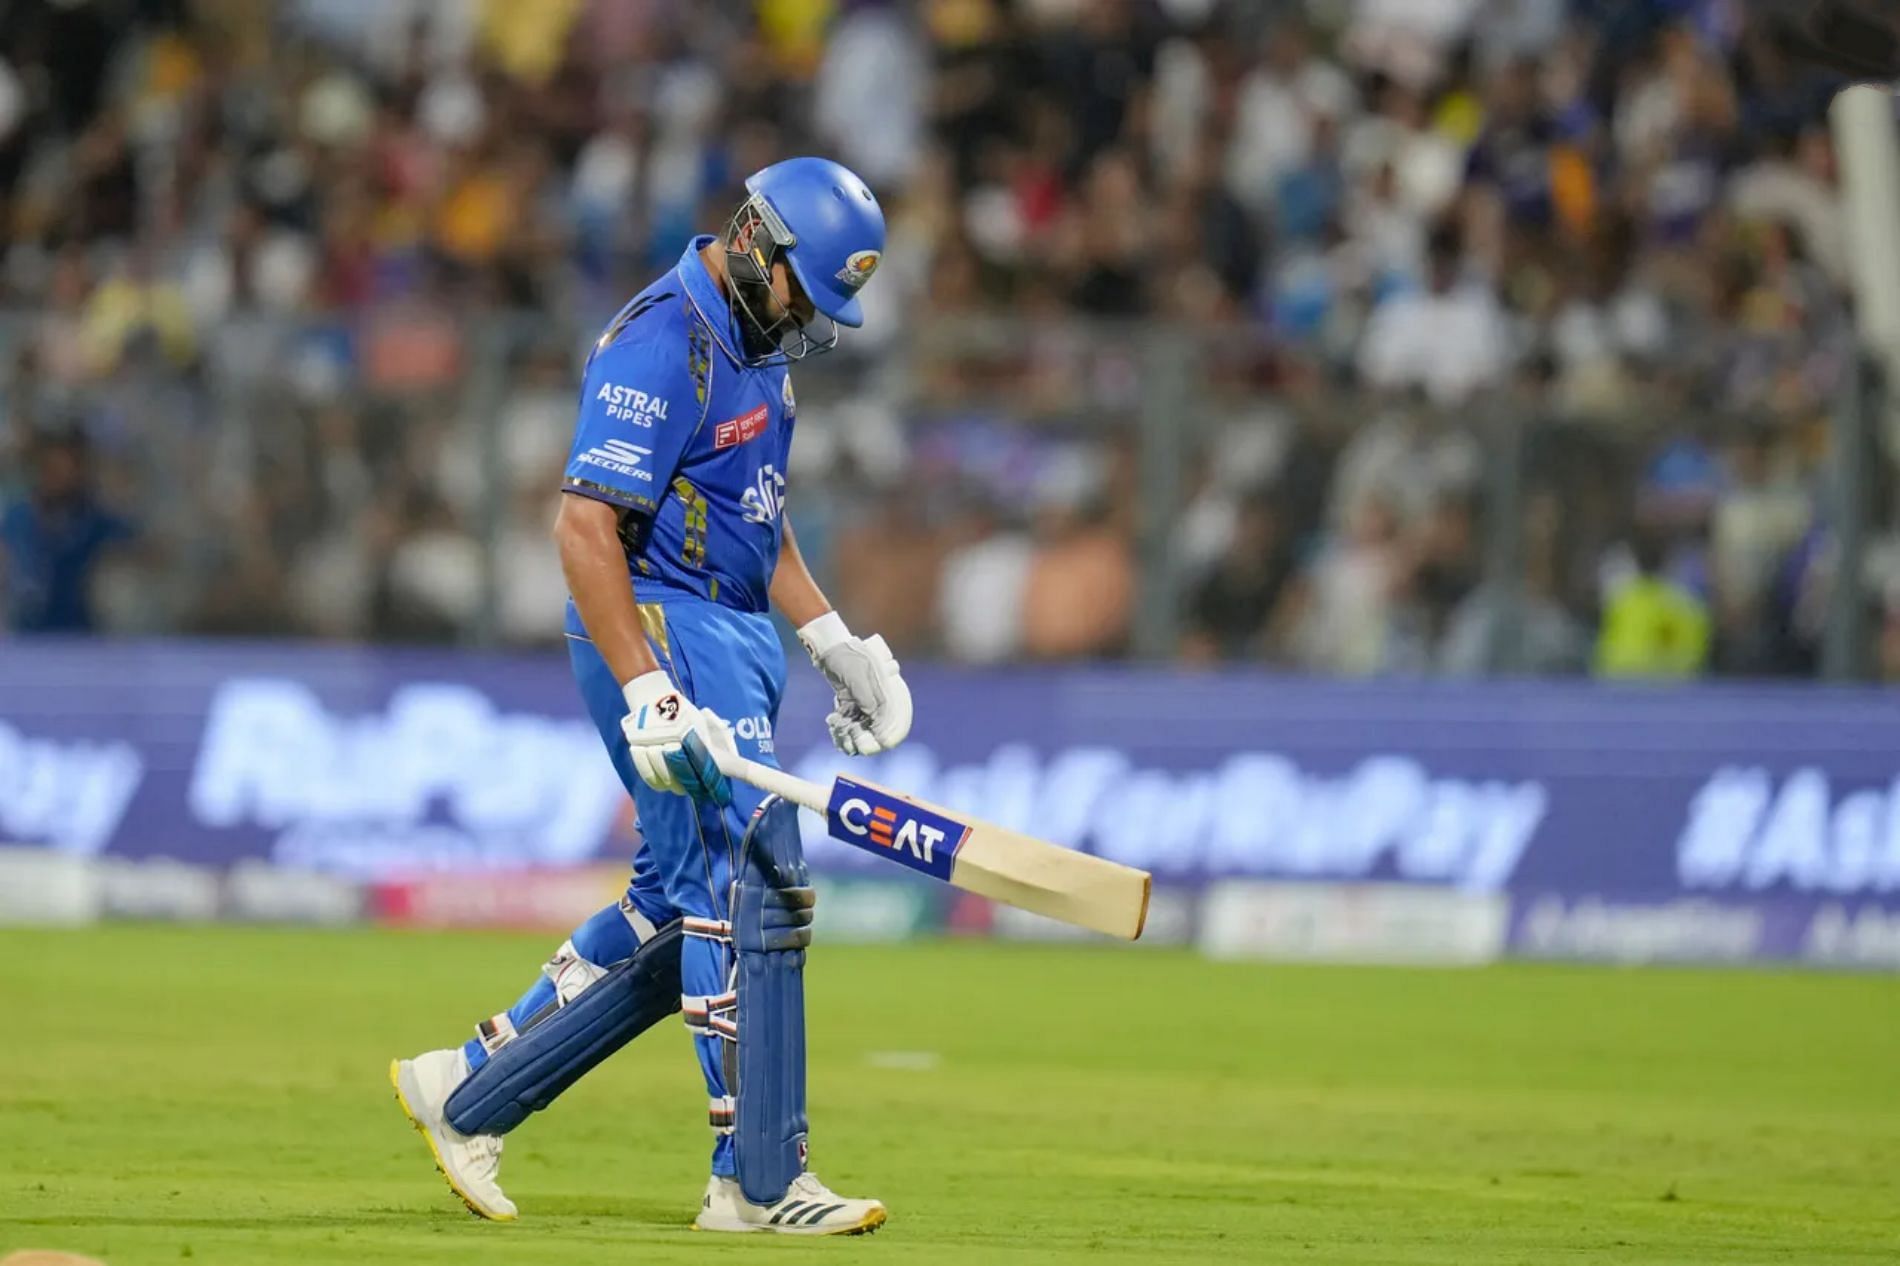 MI have won only three of their 11 matches. (Pic: BCCI/ iplt20.com)